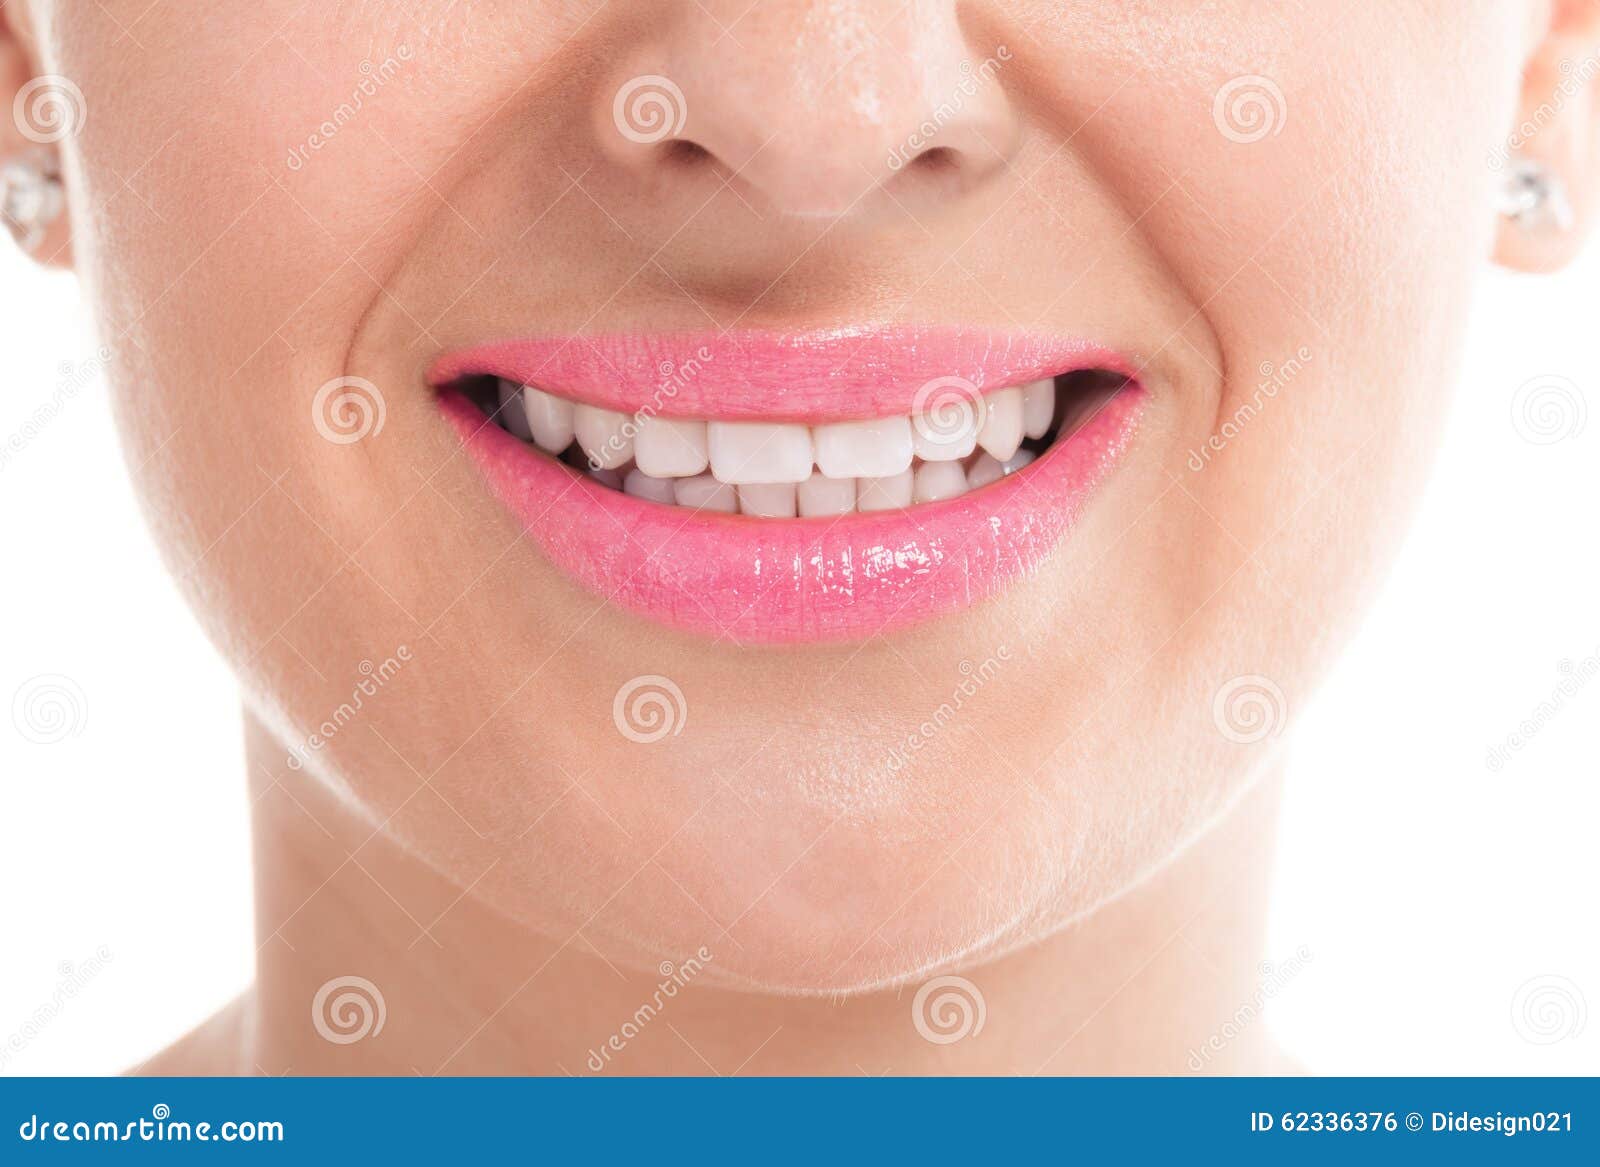 happy smiling girl with whiten hygiene teeth